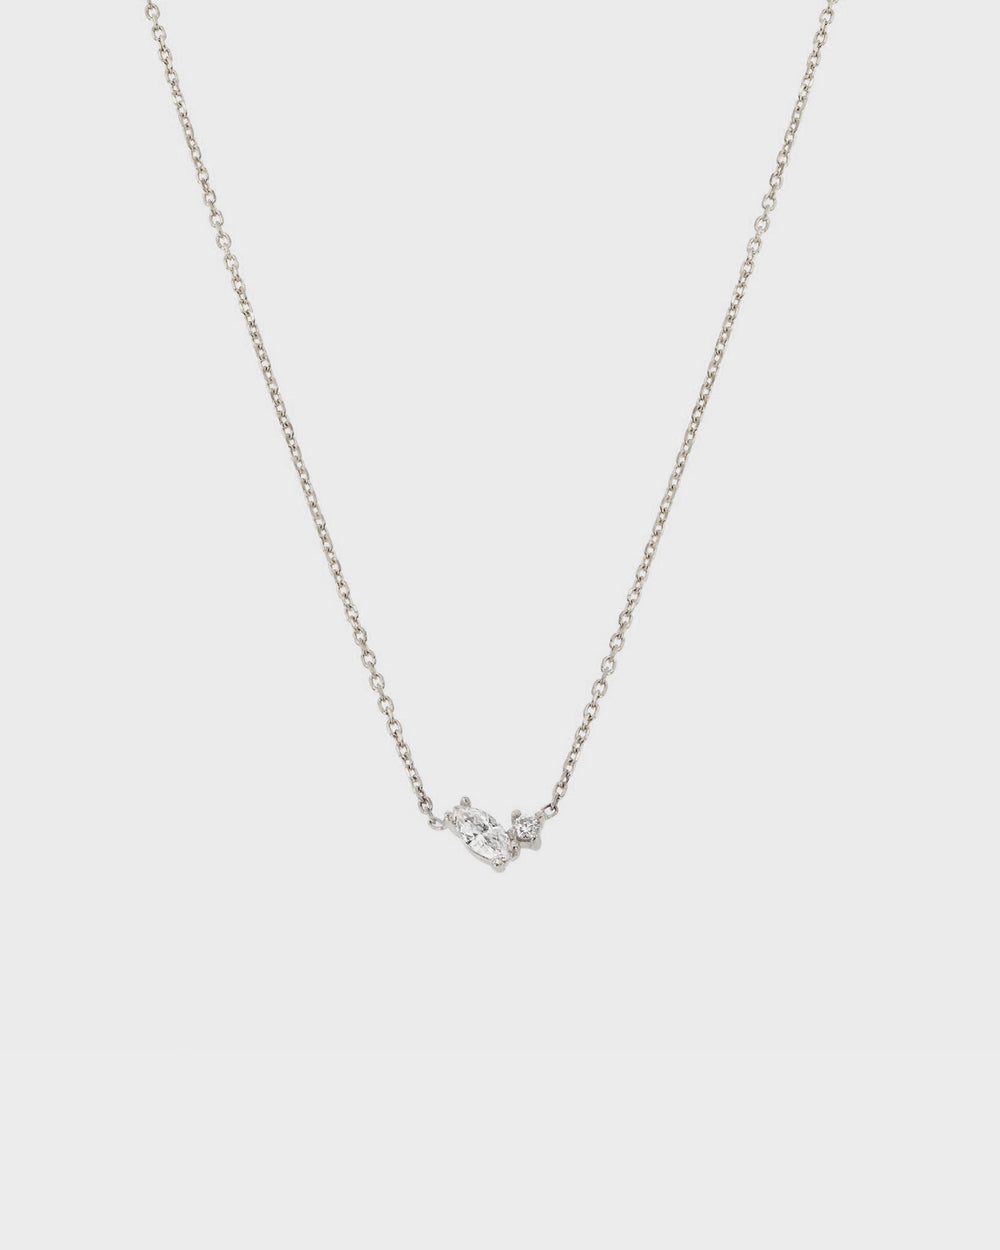 White gold necklet. - Sarah Cole Jewellery